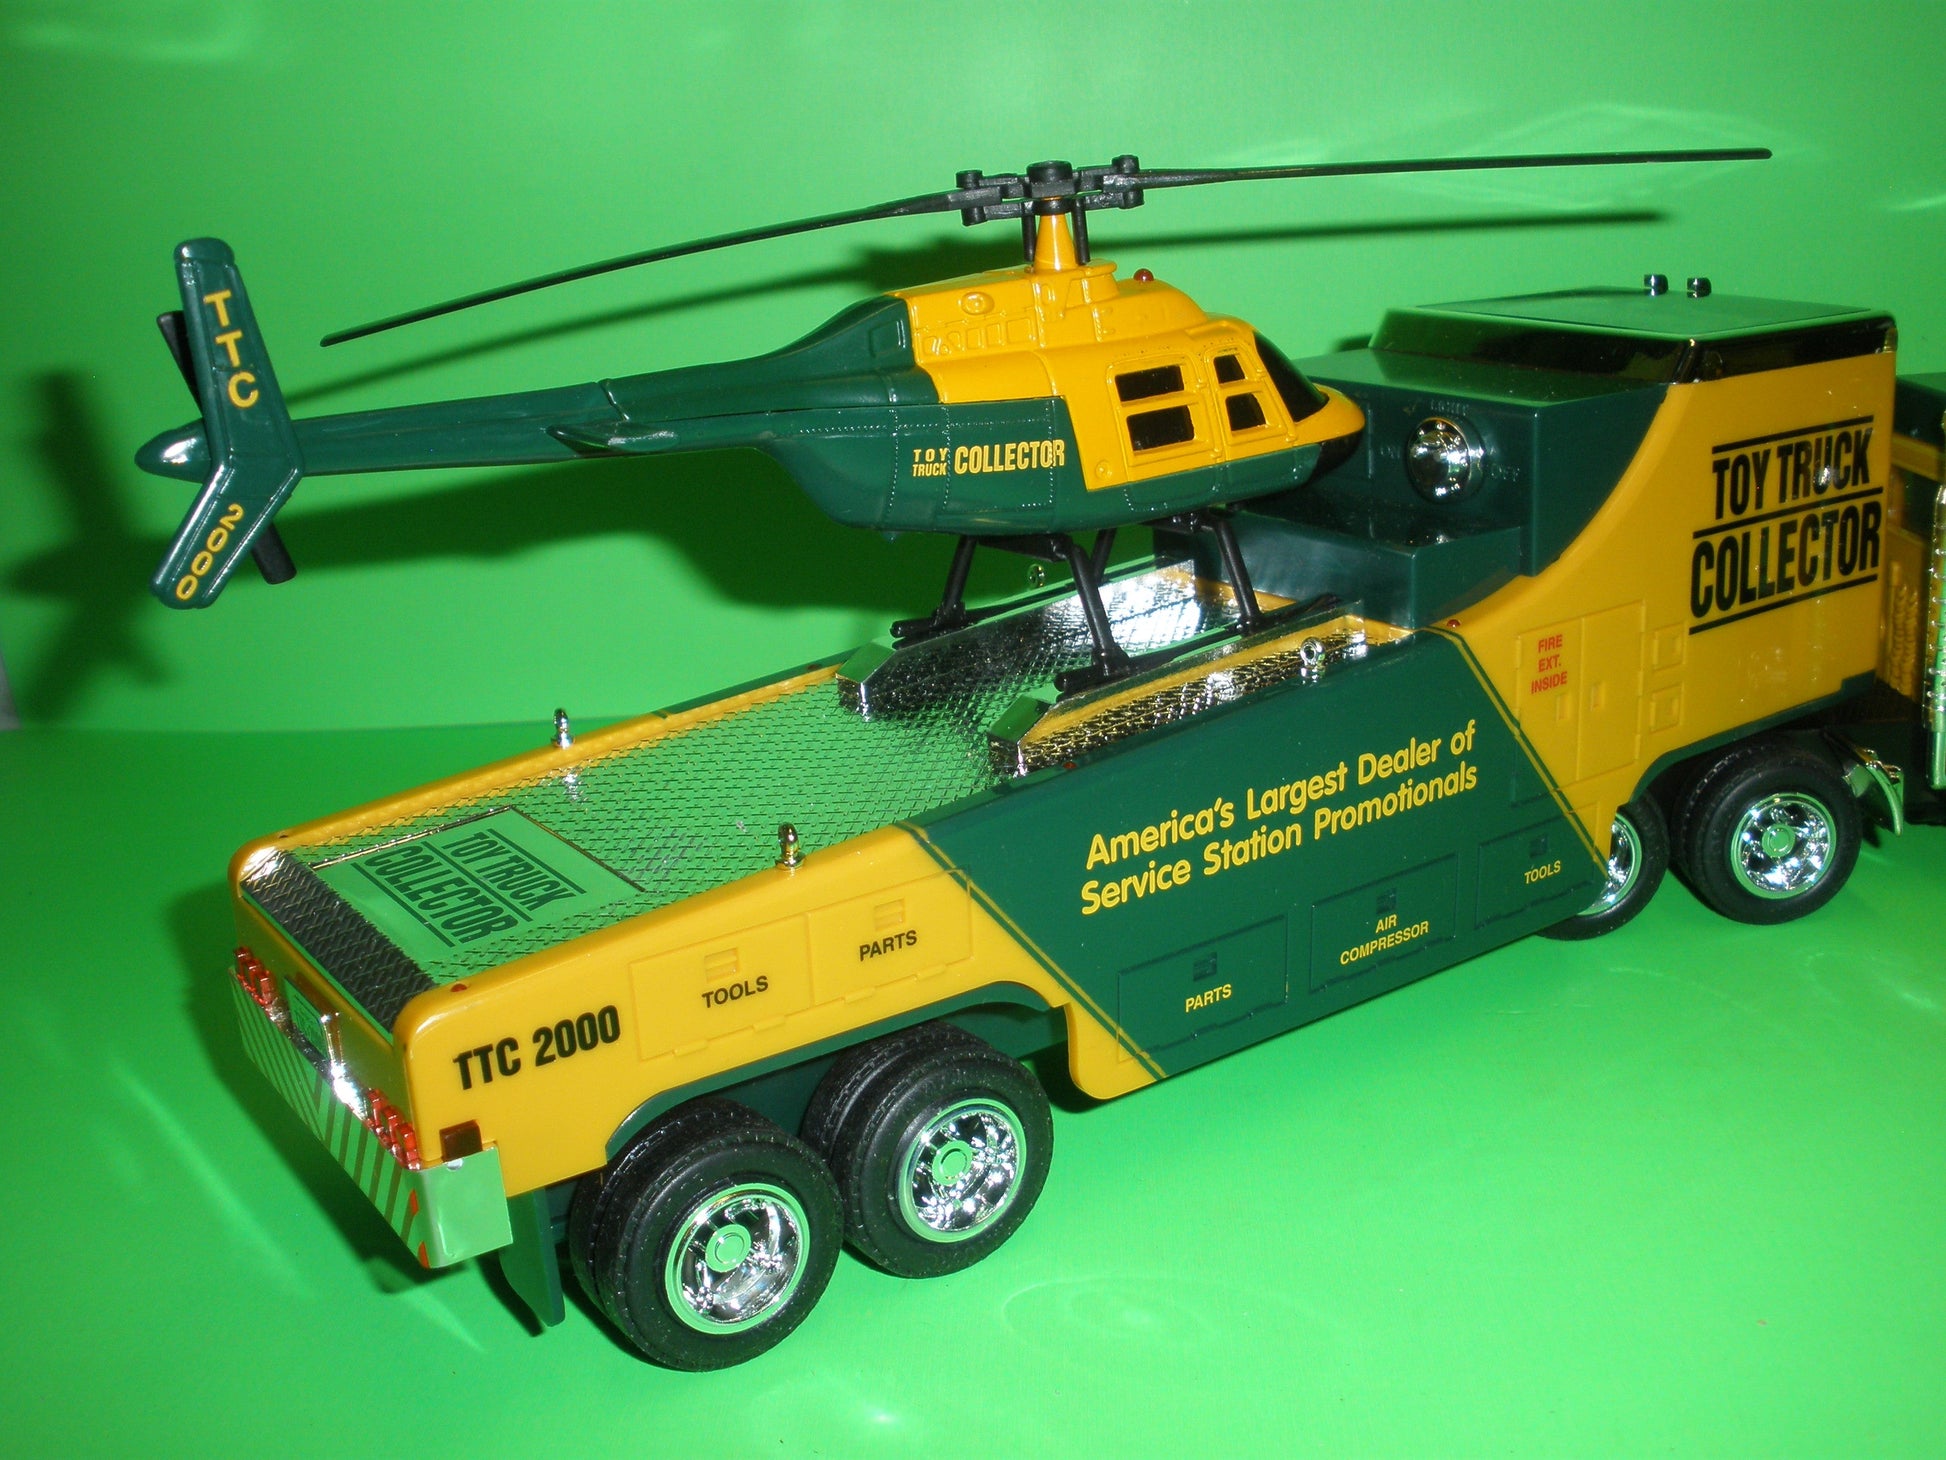 Toy Truck Collector Helicopter Carrier Truck